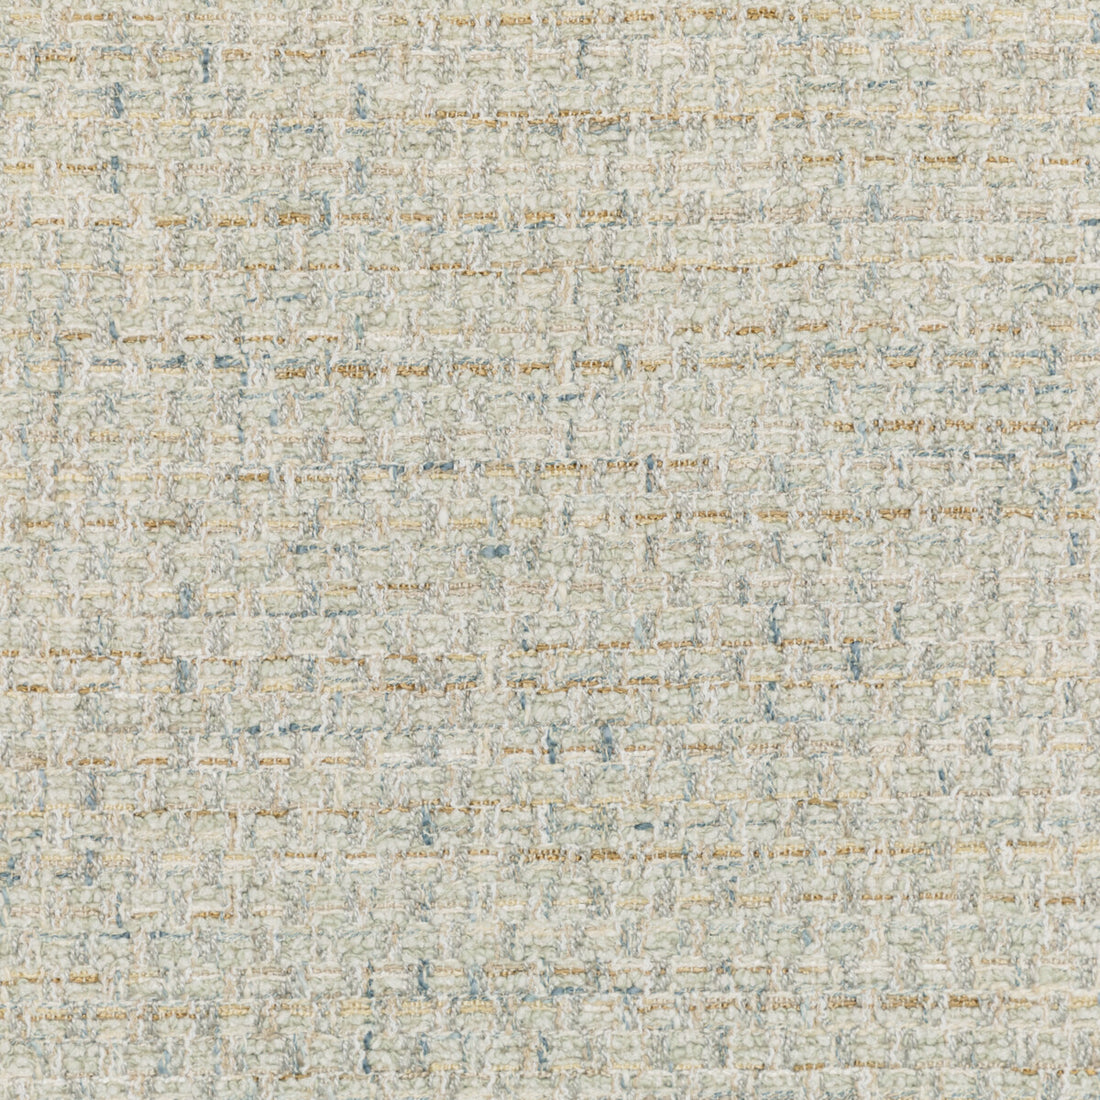 Rue Cambon fabric in pebble color - pattern 36102.1611.0 - by Kravet Couture in the Luxury Textures II collection